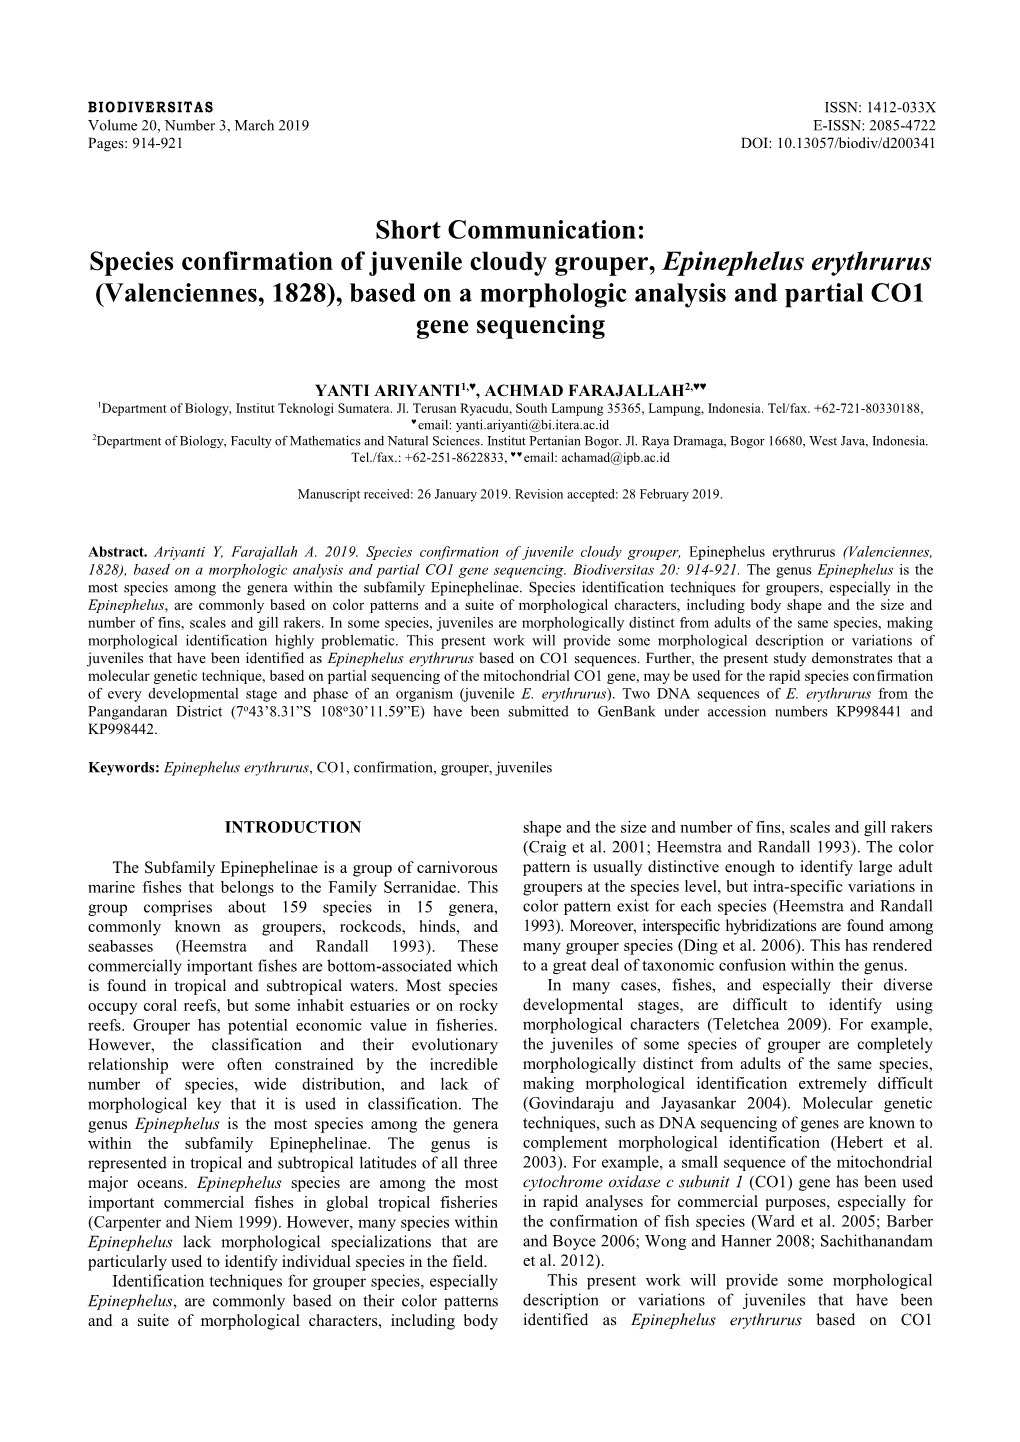 Species Confirmation of Juvenile Cloudy Grouper, Epinephelus Erythrurus (Valenciennes, 1828), Based on a Morphologic Analysis and Partial CO1 Gene Sequencing